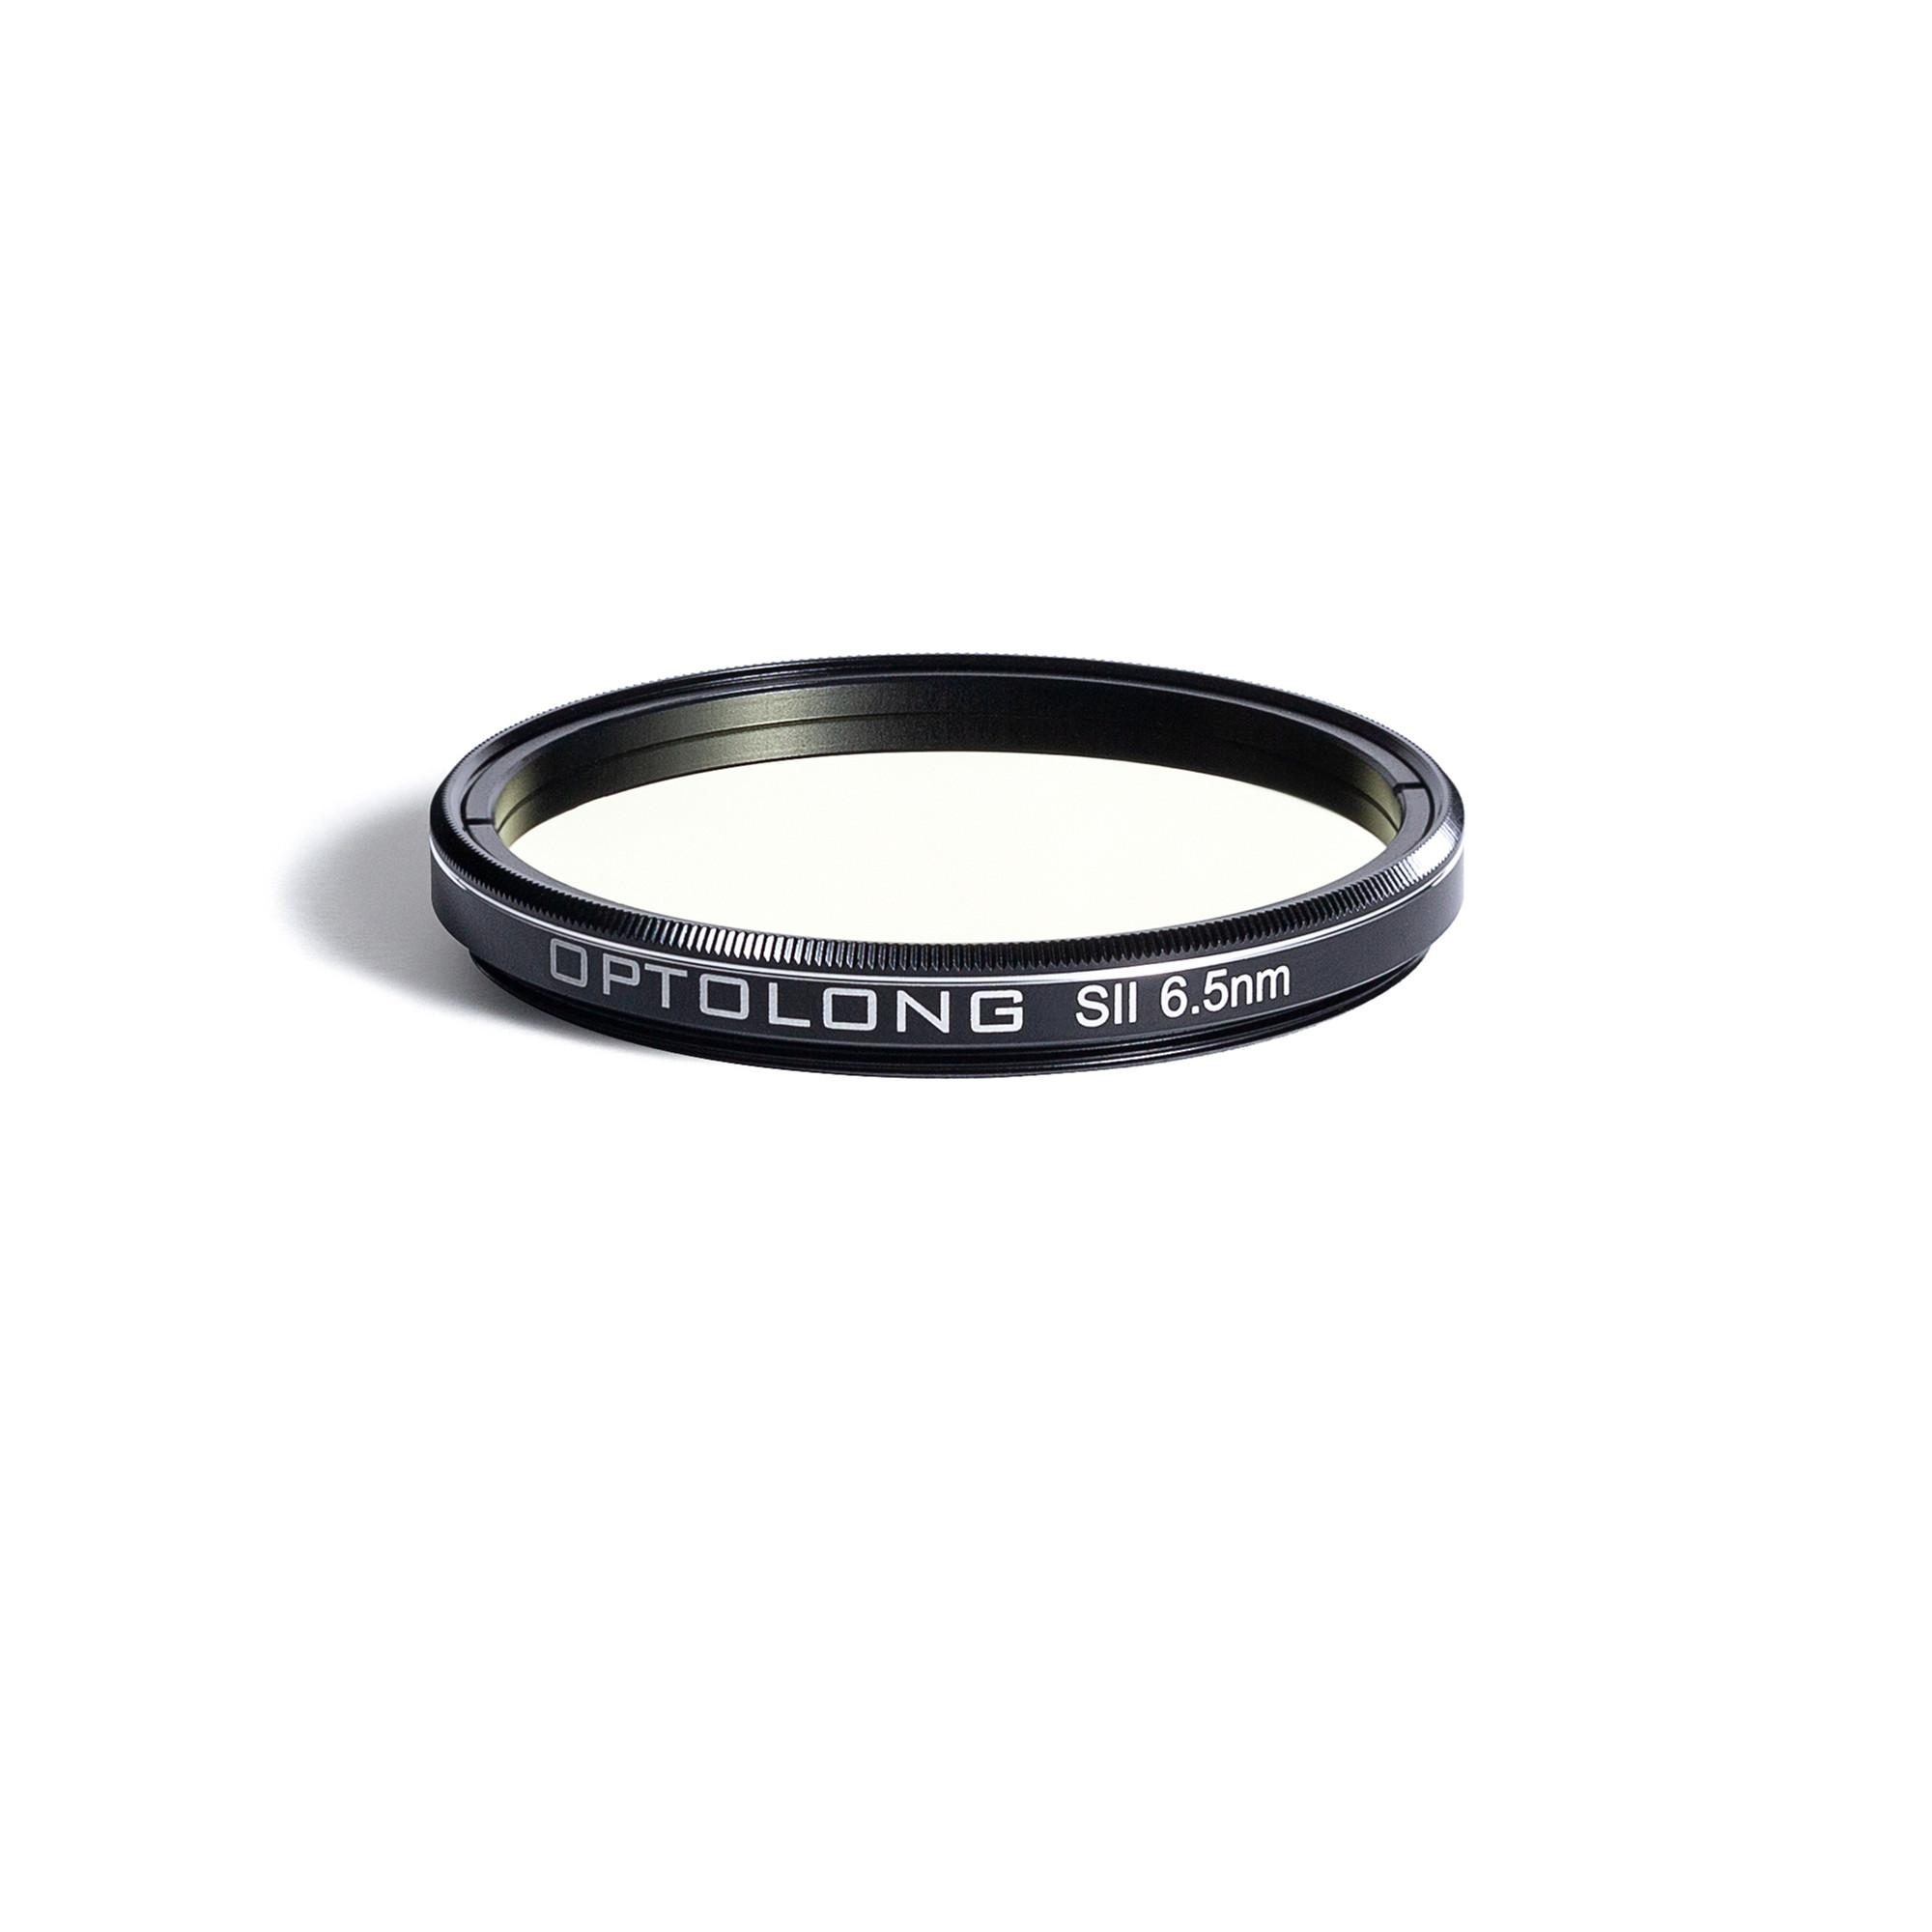 Optolong SII 6.5nm imaging narrow band filter for nebulae photography